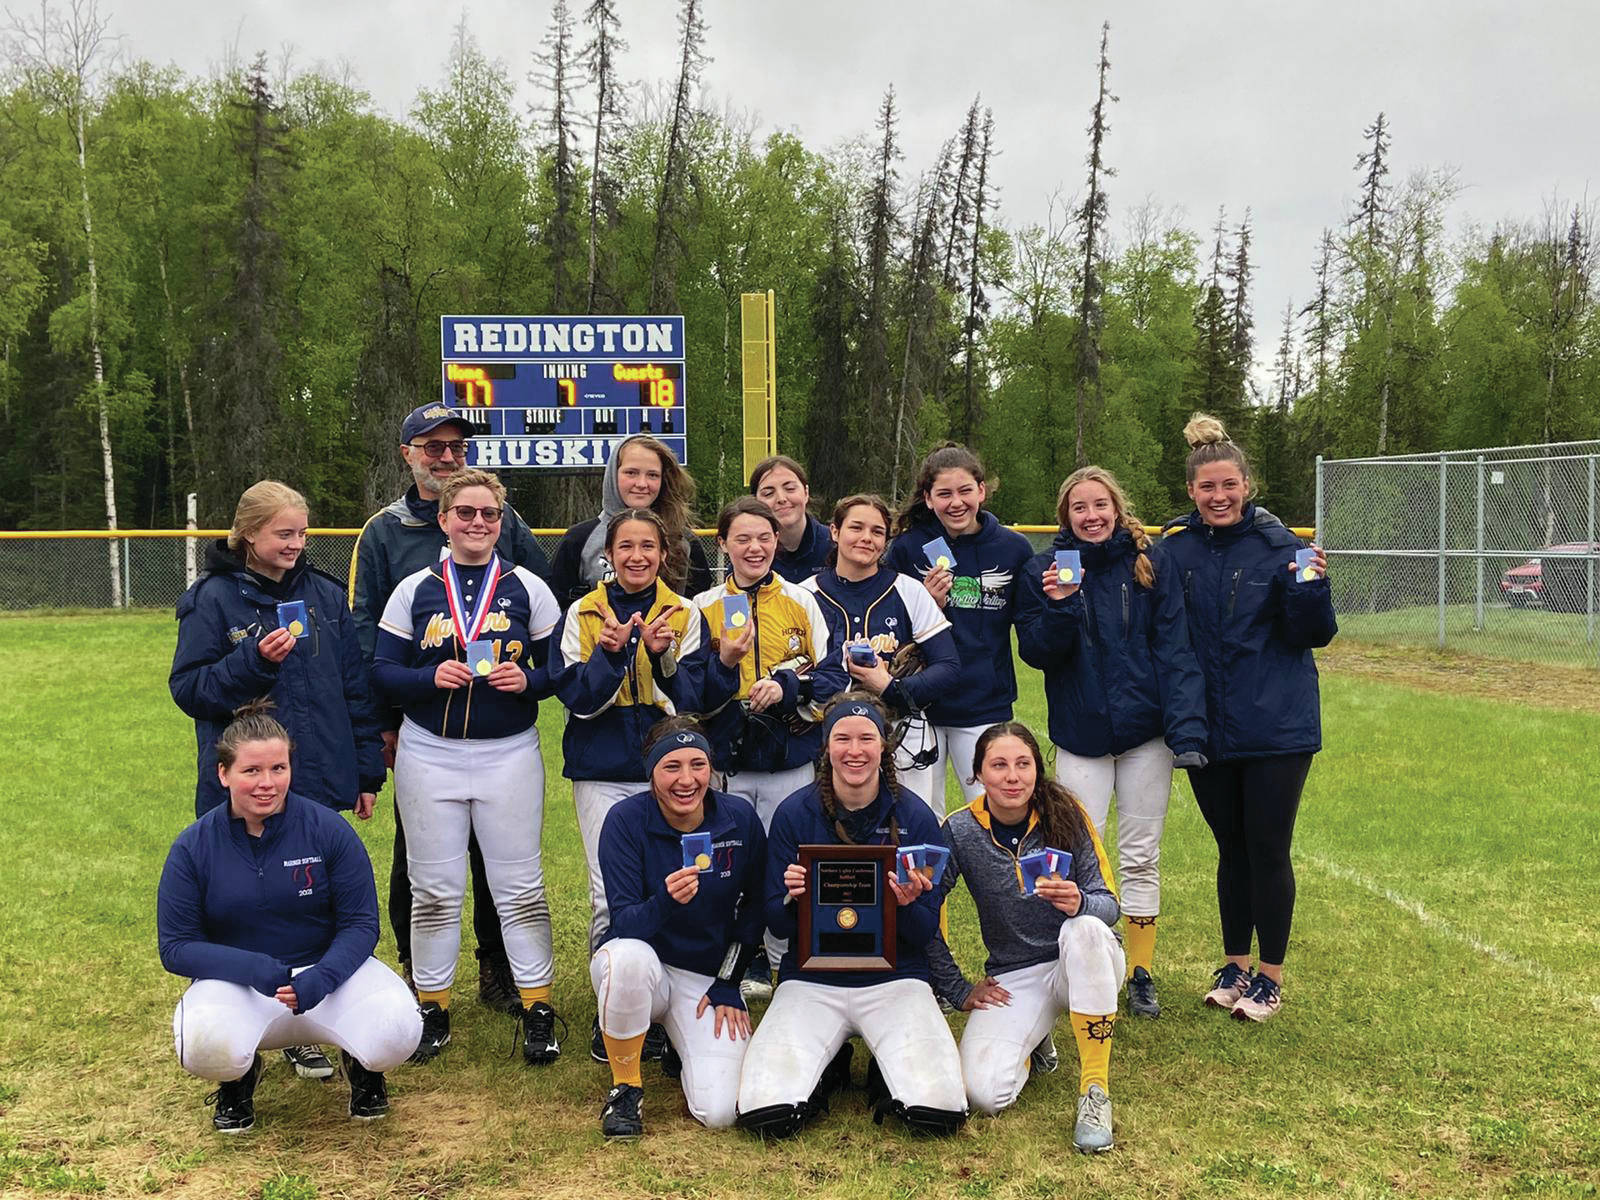 The Homer Mariner softball team celebrates after winning the Northern Lights Conference in an 18-17 win over Kodaik. (Photo courtesy Homer Mariner Softball team)